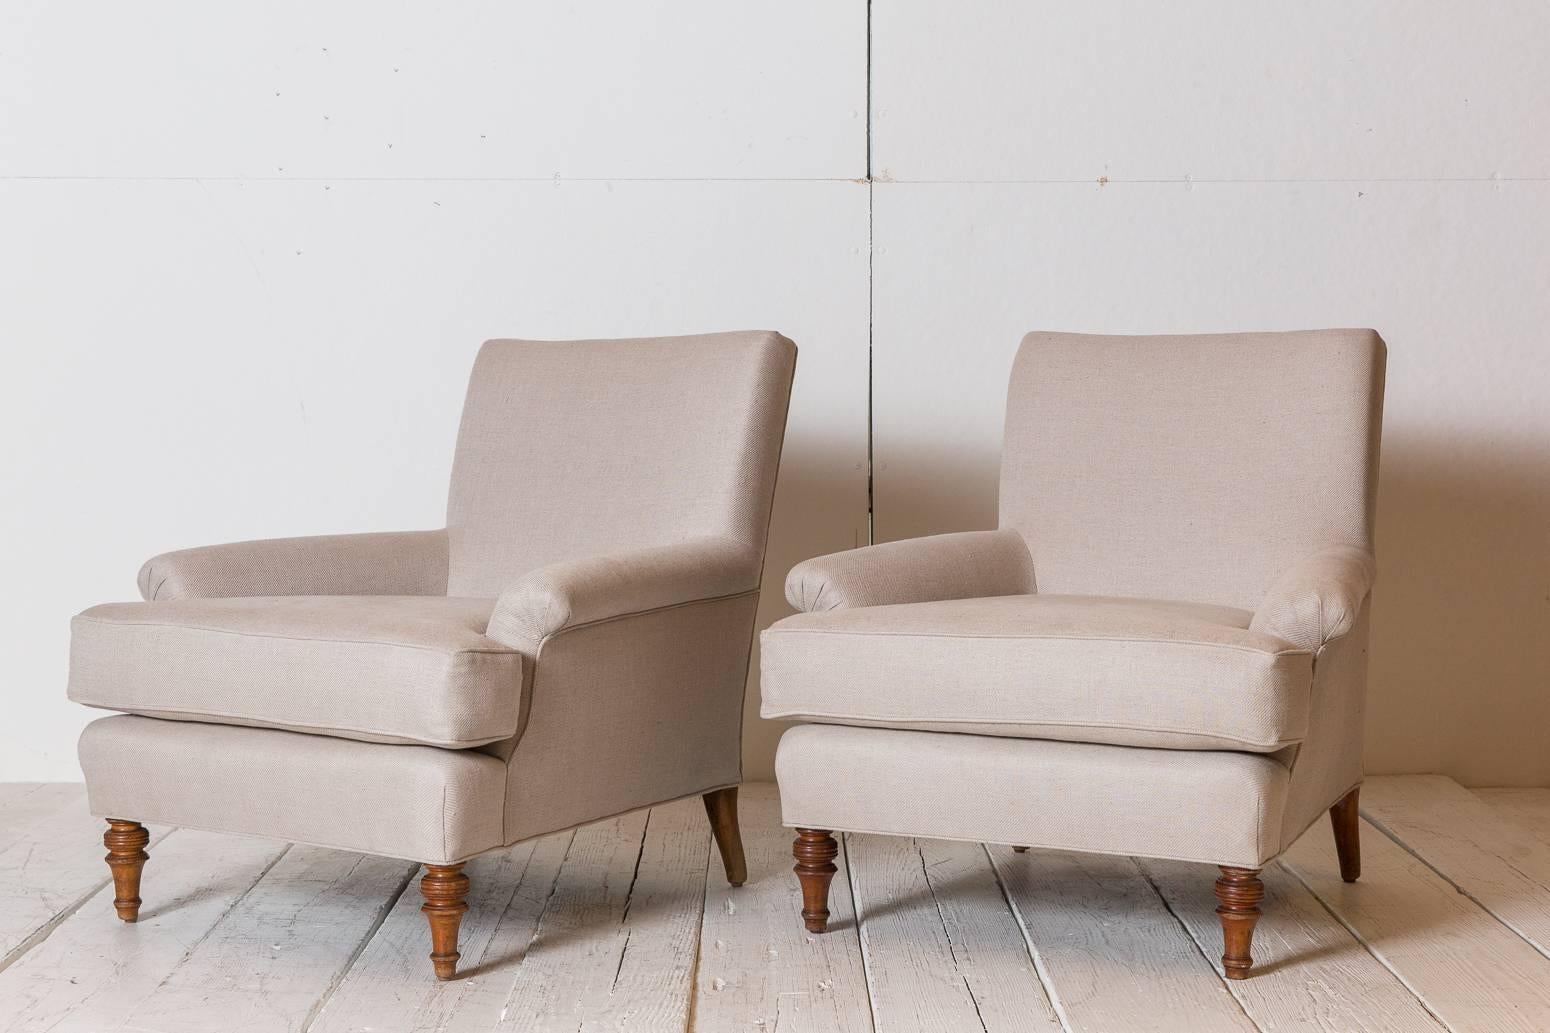 Pair of French lounge chairs newly upholstered in natural linen with oak turned legs.